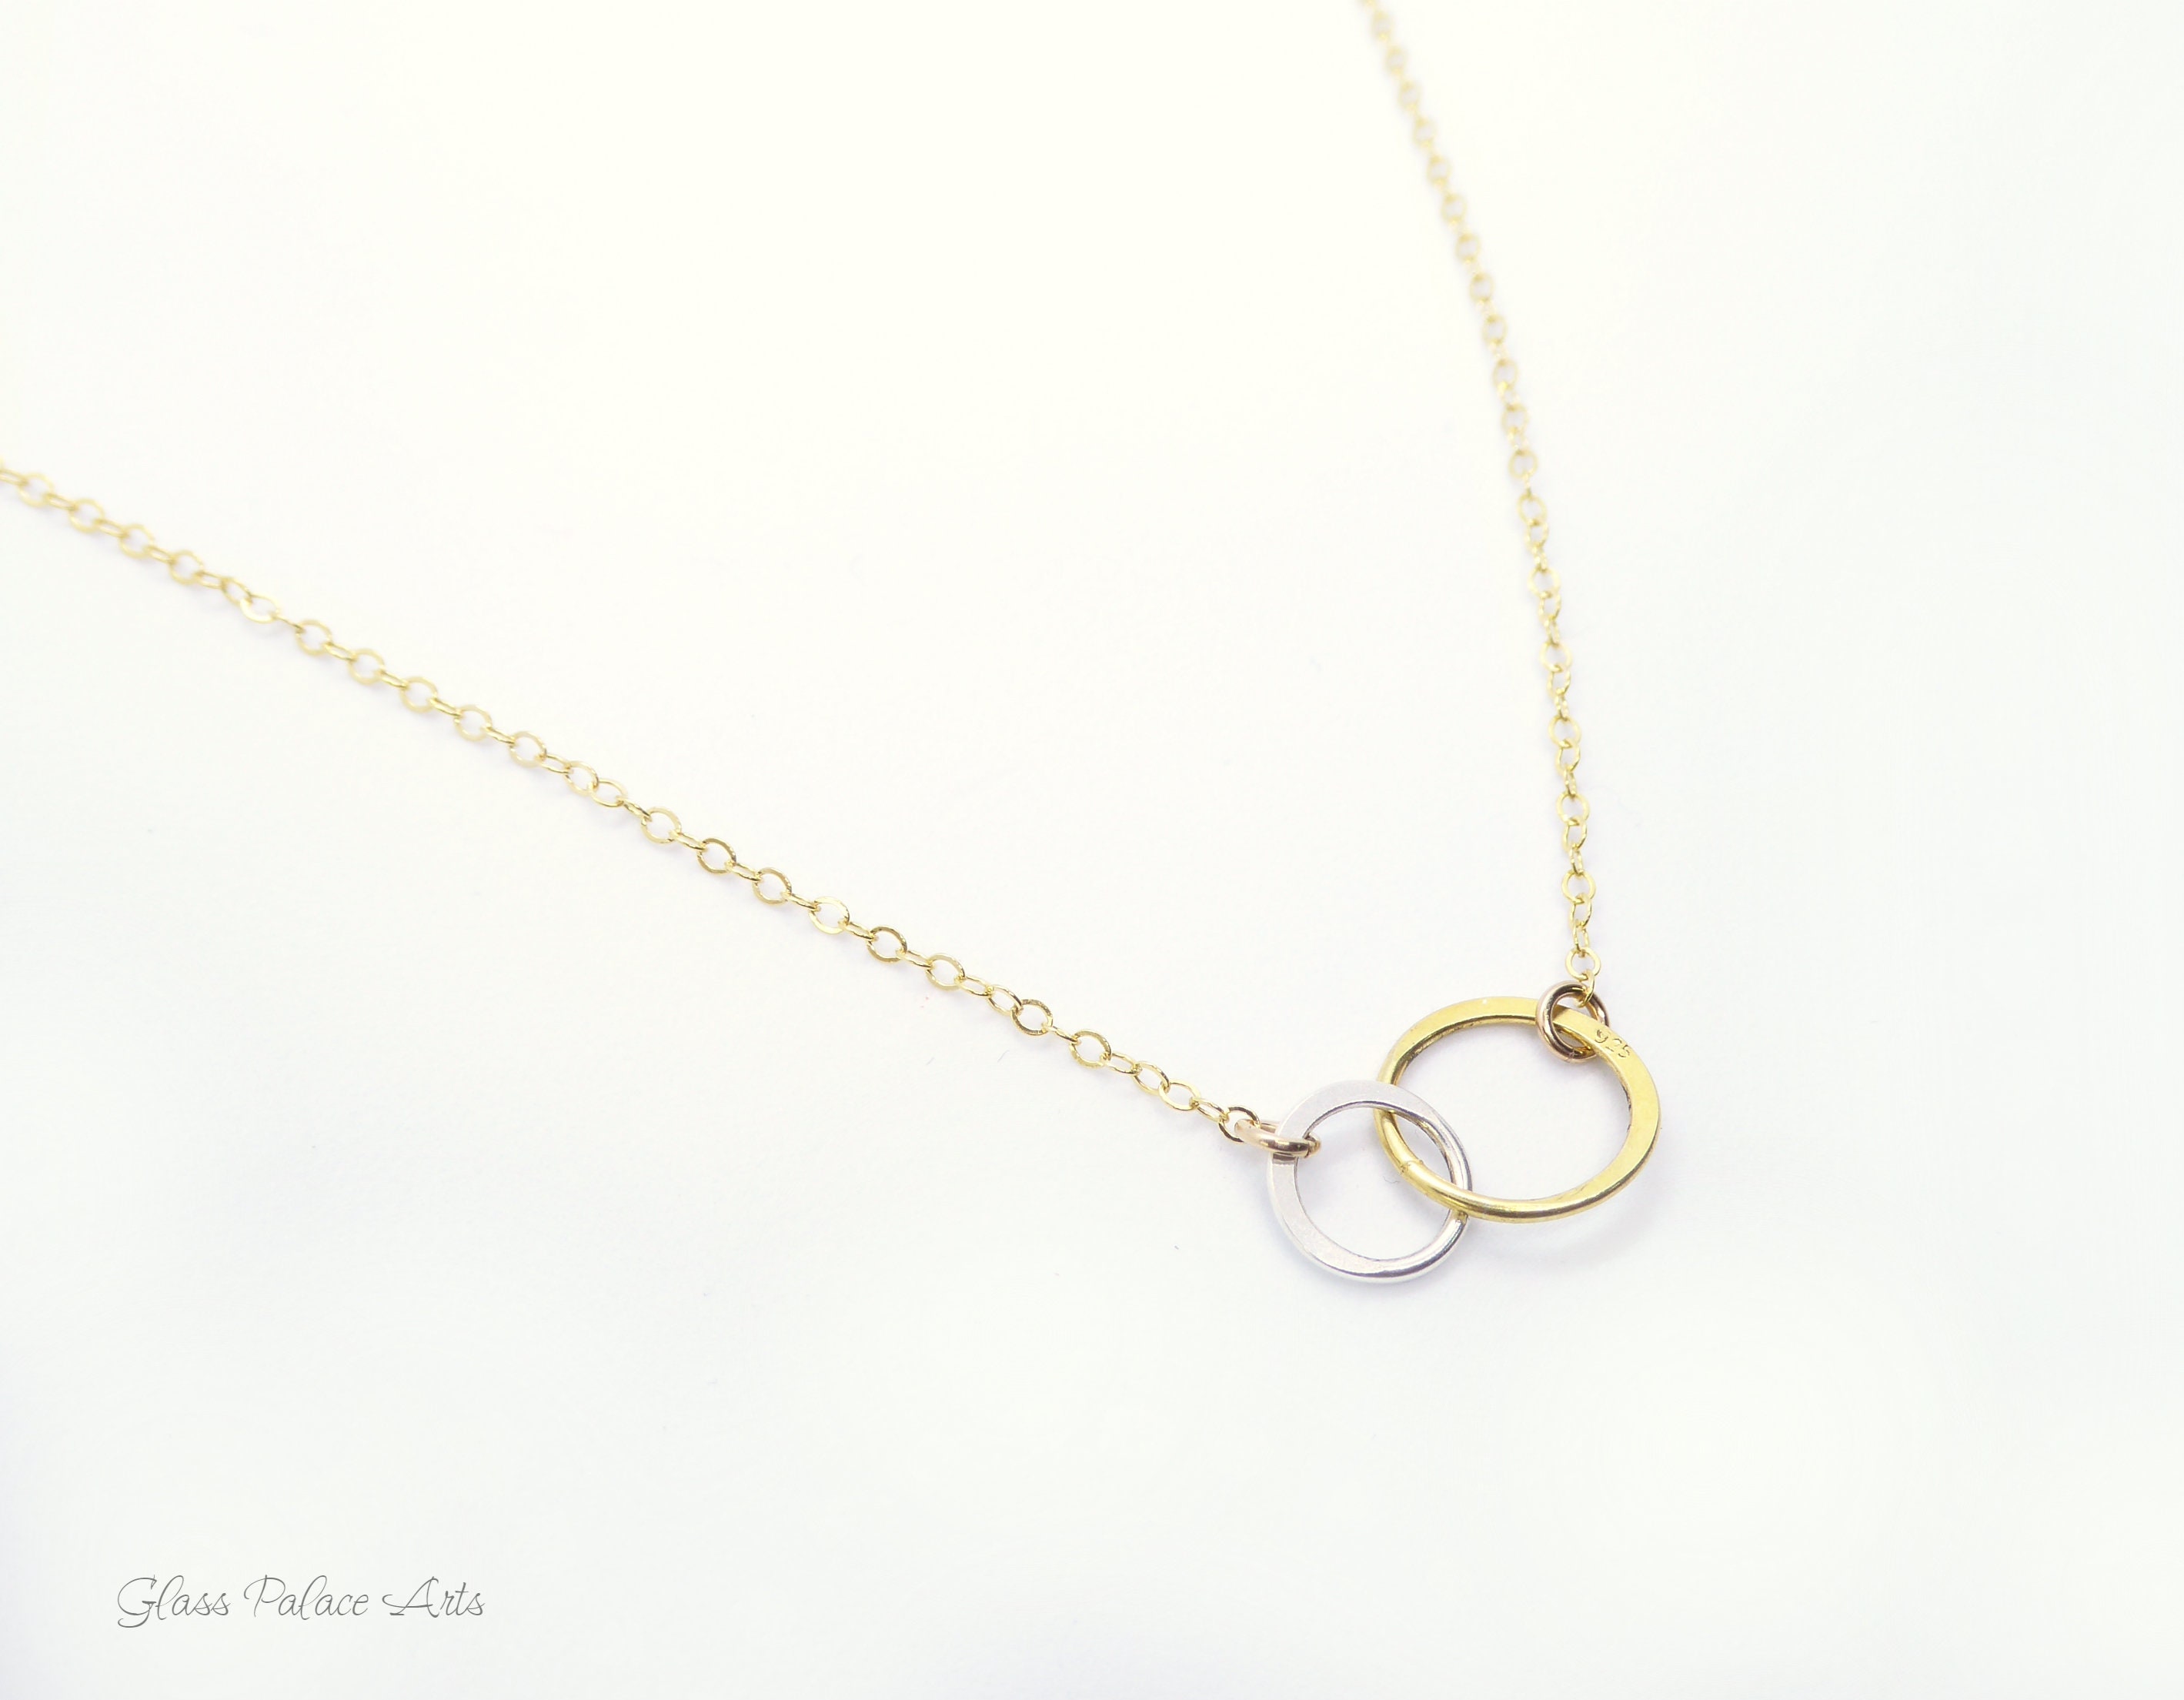 Simple Circle Necklace With Infinity Pendant - Sterling Silver, Gold, –  Glass Palace Arts